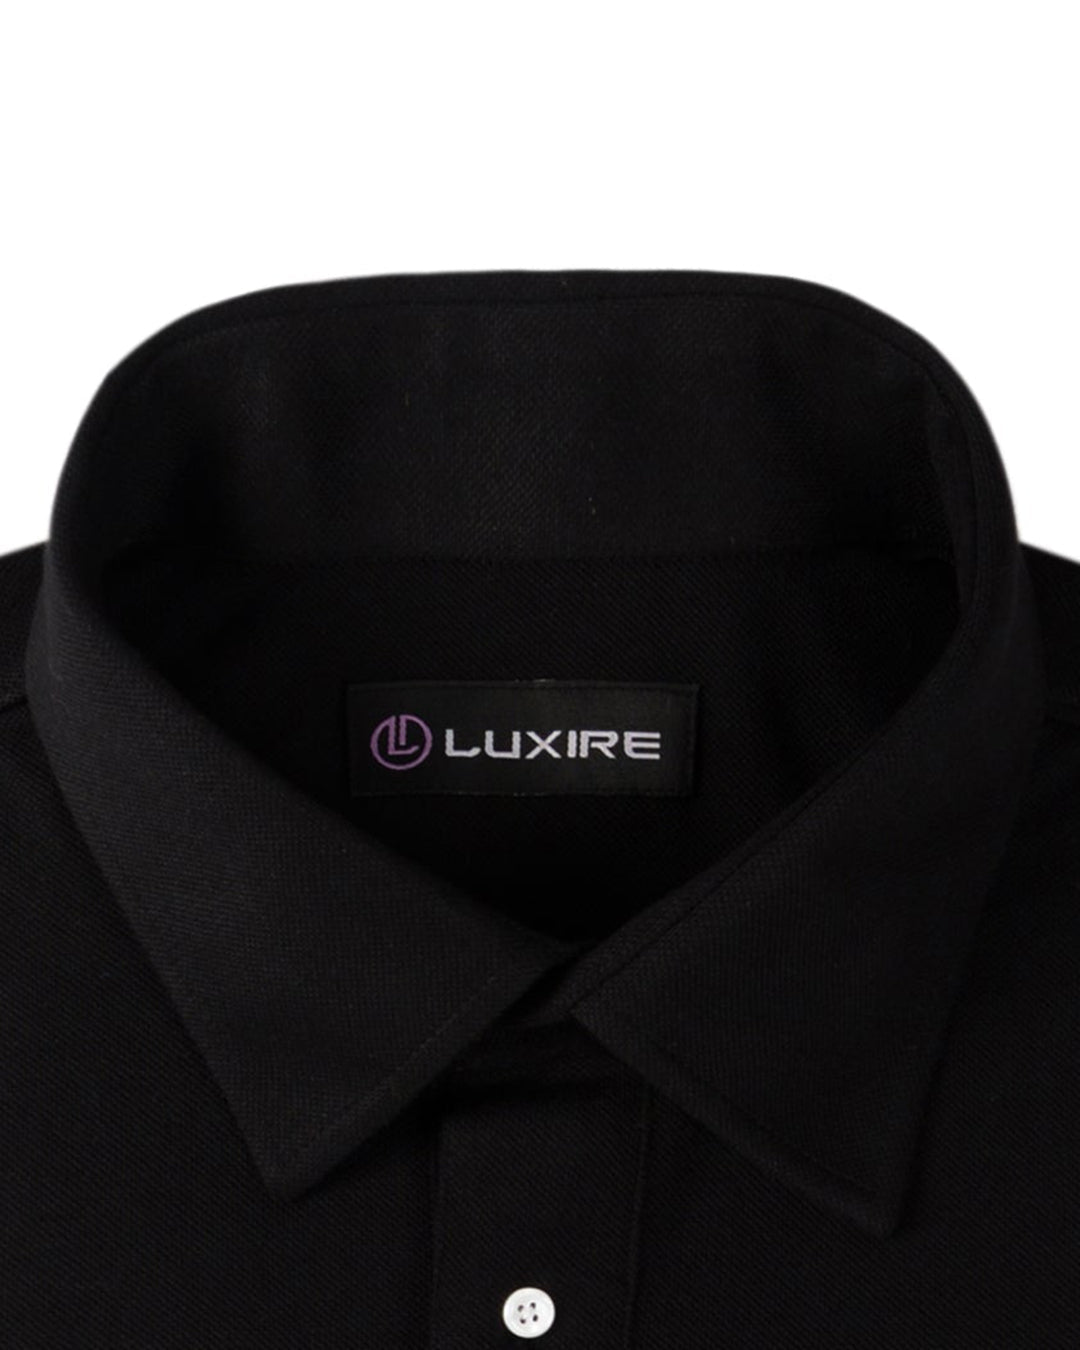 Collar of the custom oxford polo shirt for men by Luxire in soft black